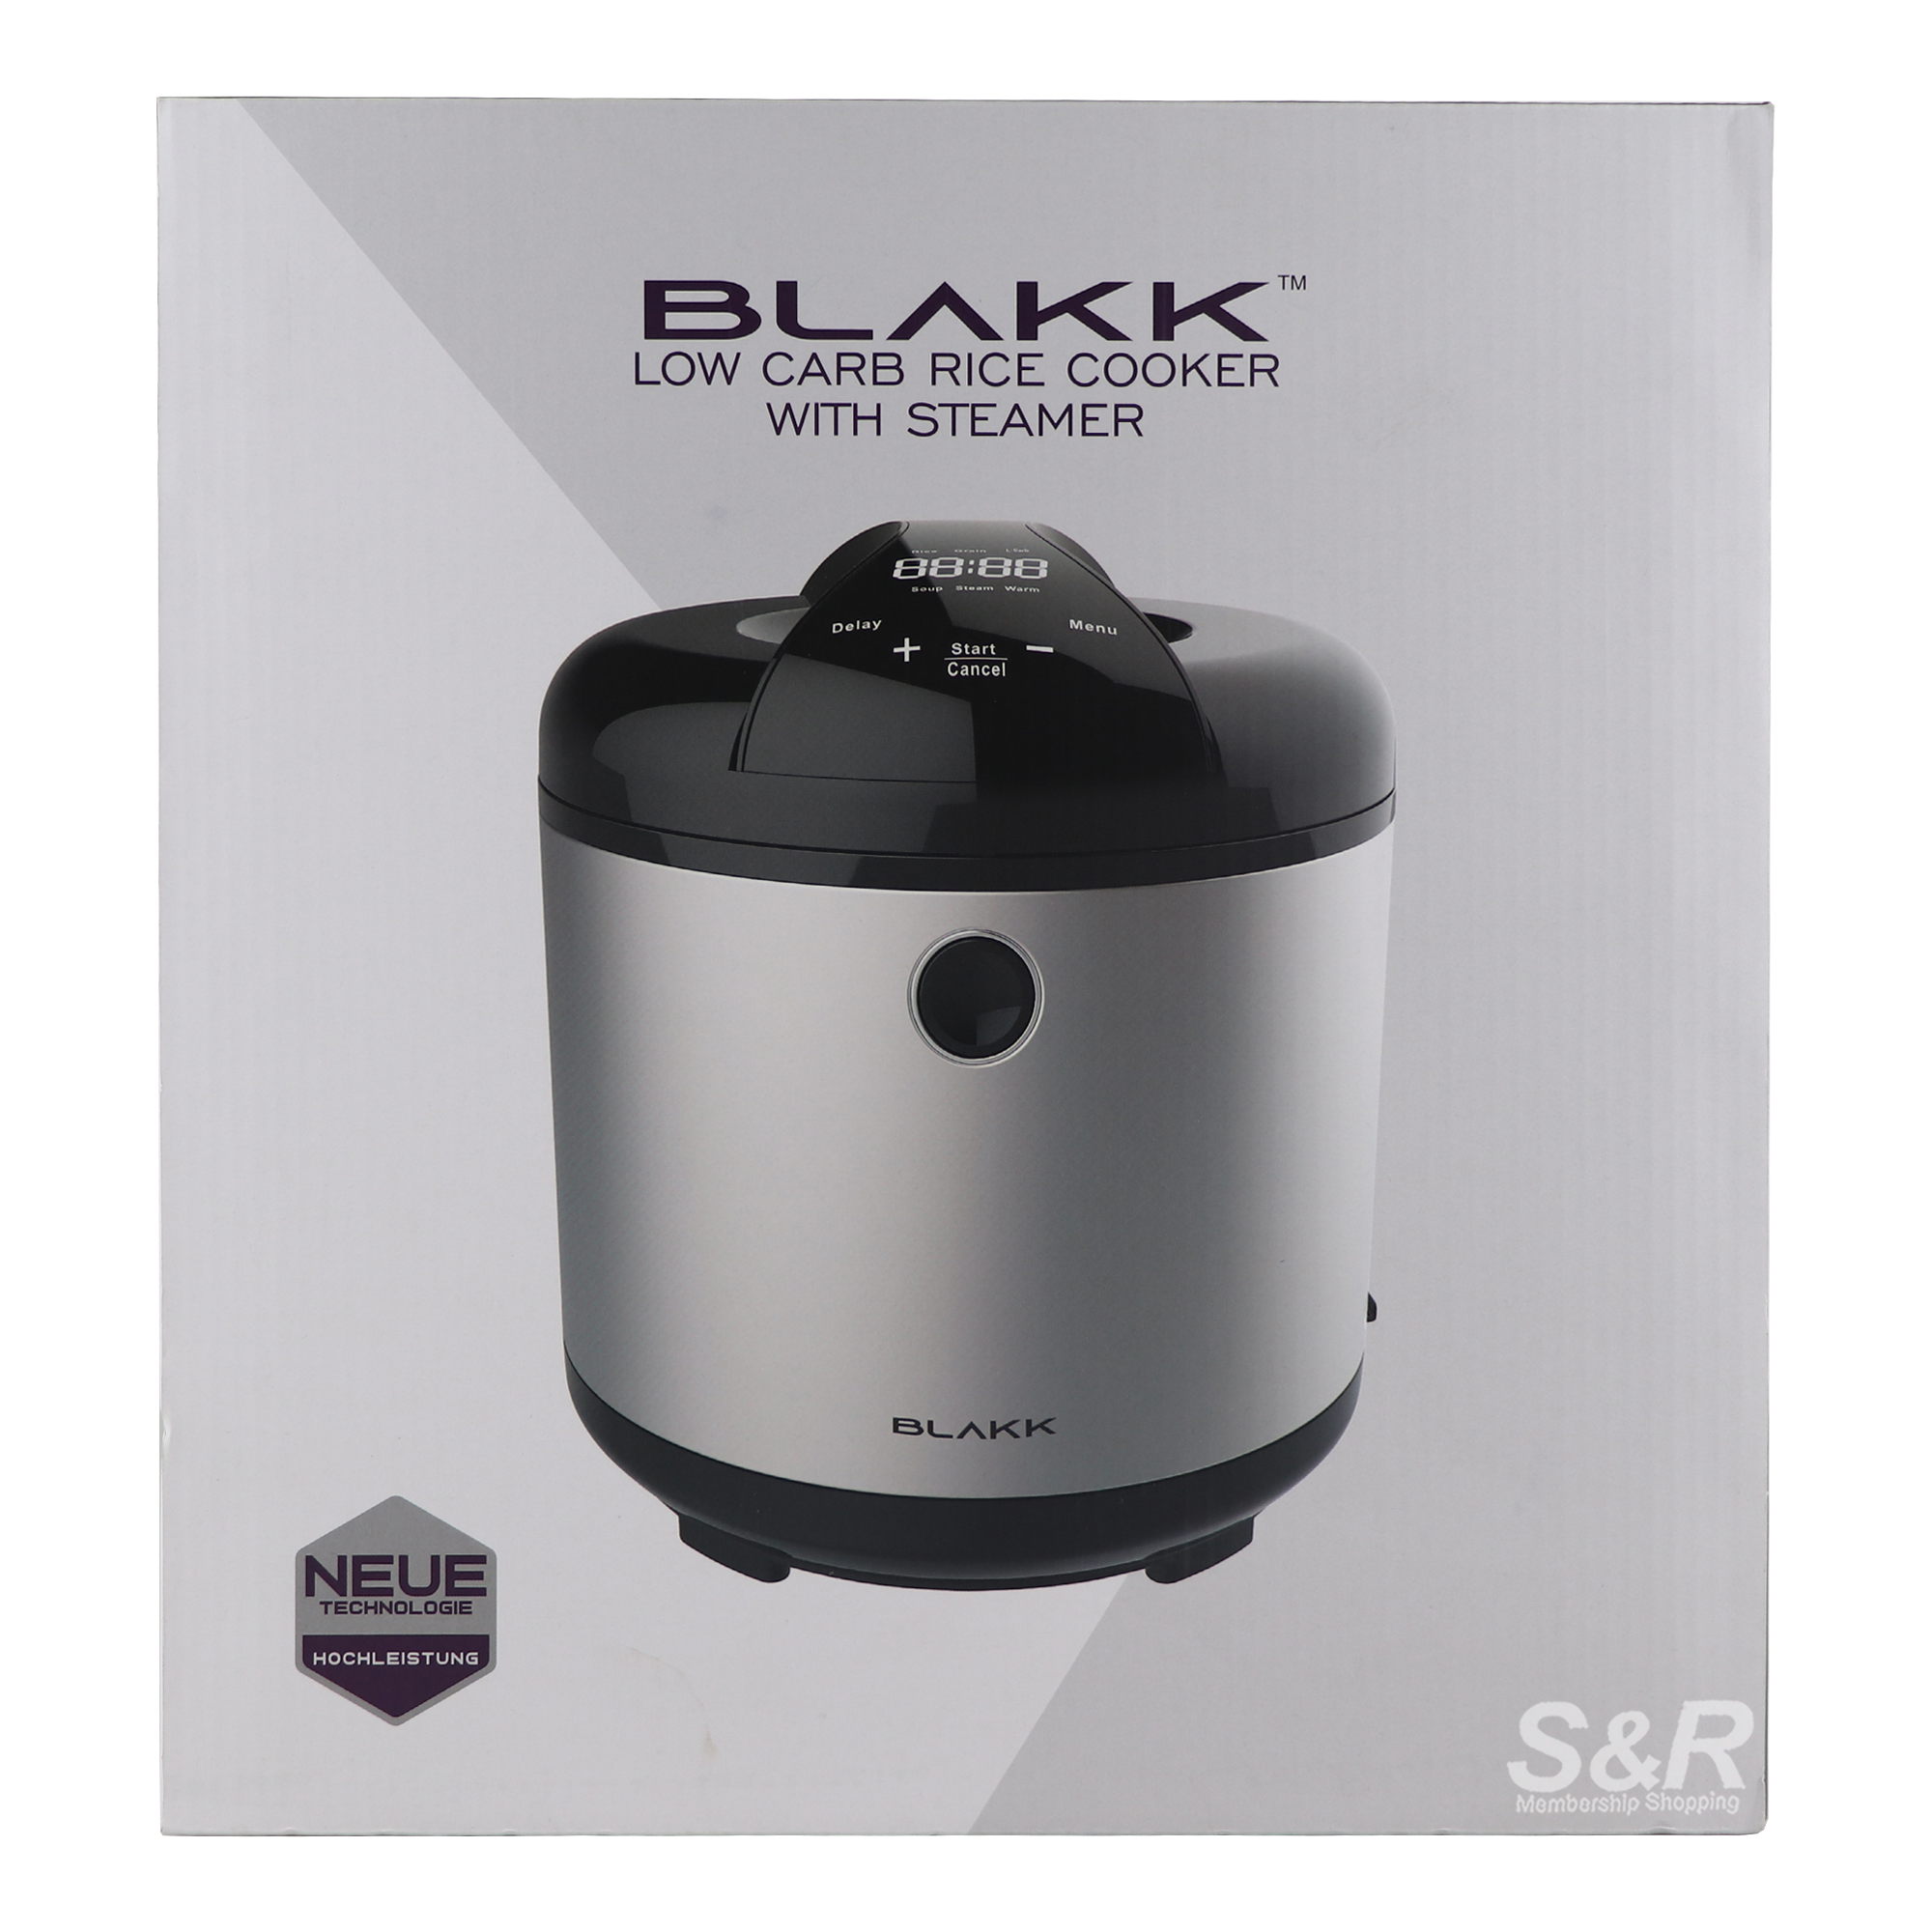 Blakk Low Carb Rice Cooker with Steamer MHLCRC-10SS